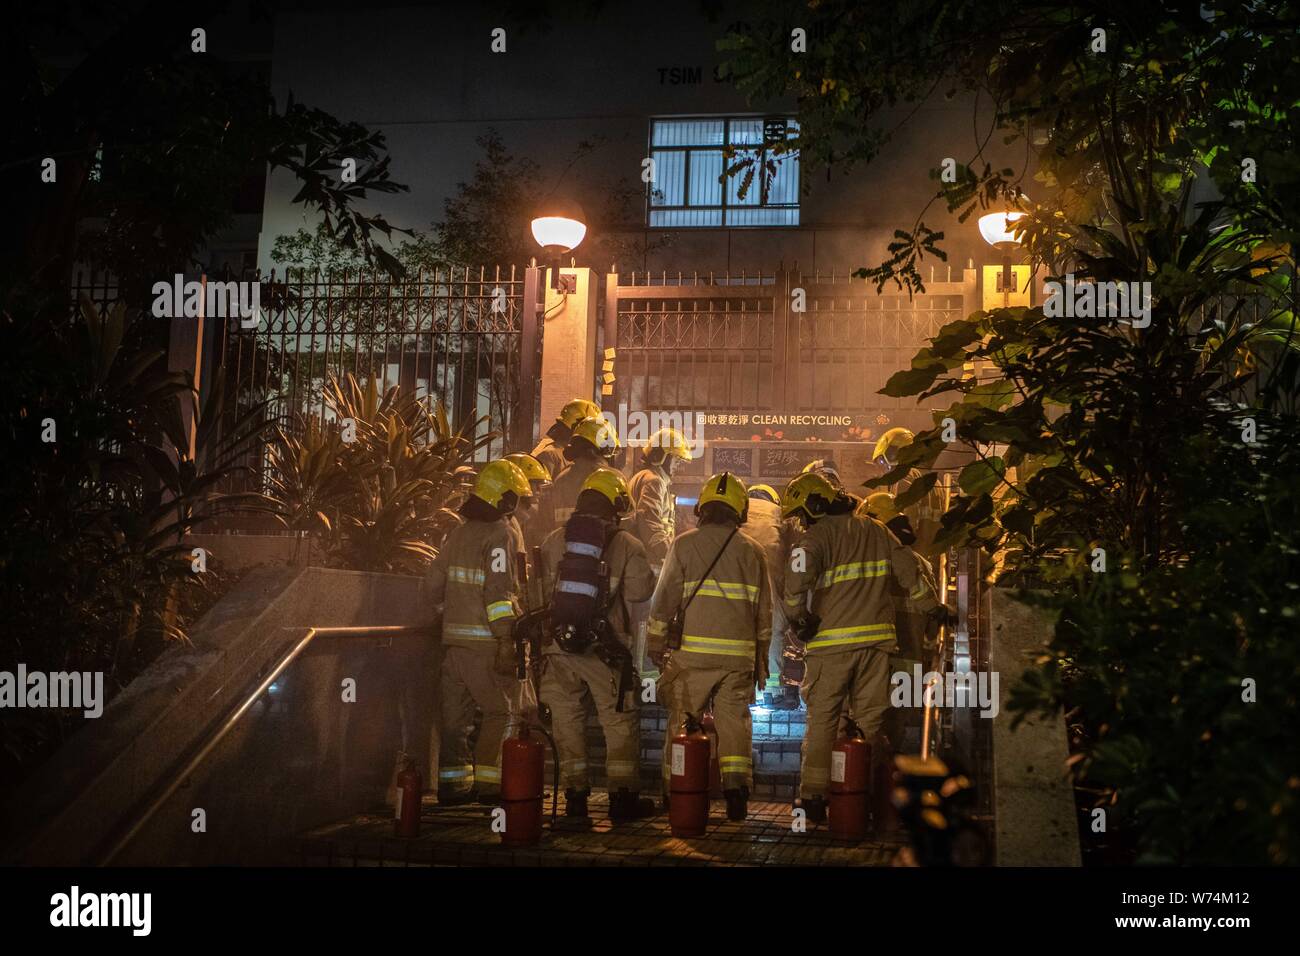 Fire men try to extinguish a fire at the door of Yau Tsim District Police  Headquarter during the protest.Pro-democracy protesters have continued weekly rallies on the streets of Hong Kong against a controversial extradition bill since June 9, as the city plunged into crisis after waves of demonstrations and several violent clashes. Hong Kong's Chief Executive Carrie Lam apologised for introducing the bill and declared it 'dead', however protesters have continued to draw large crowds with demands for Lam's resignation and completely withdraw the bill. Stock Photo